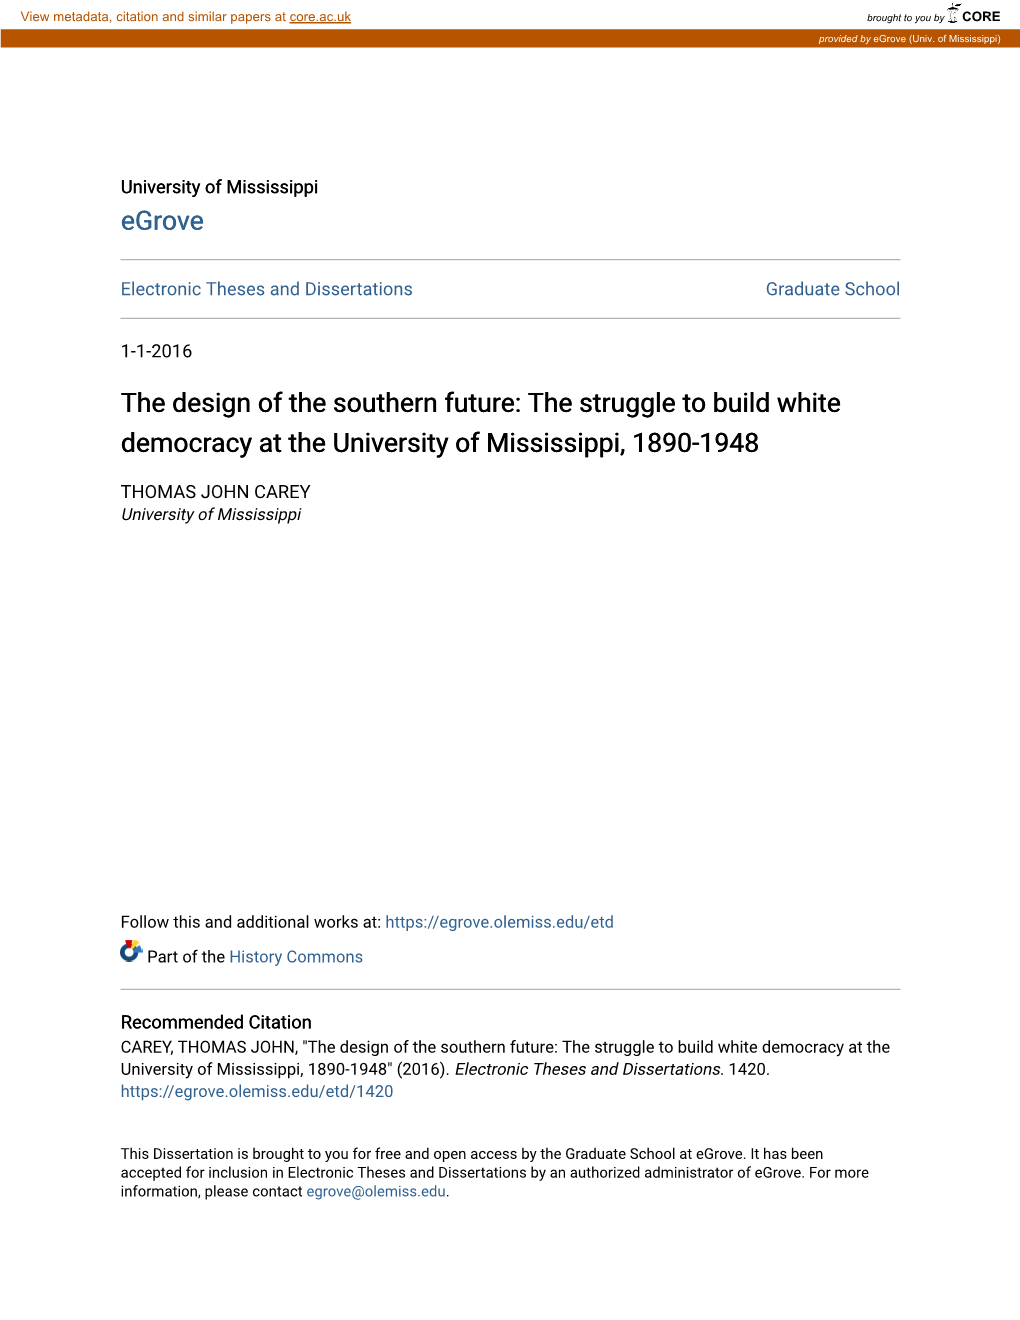 The Struggle to Build White Democracy at the University of Mississippi, 1890-1948